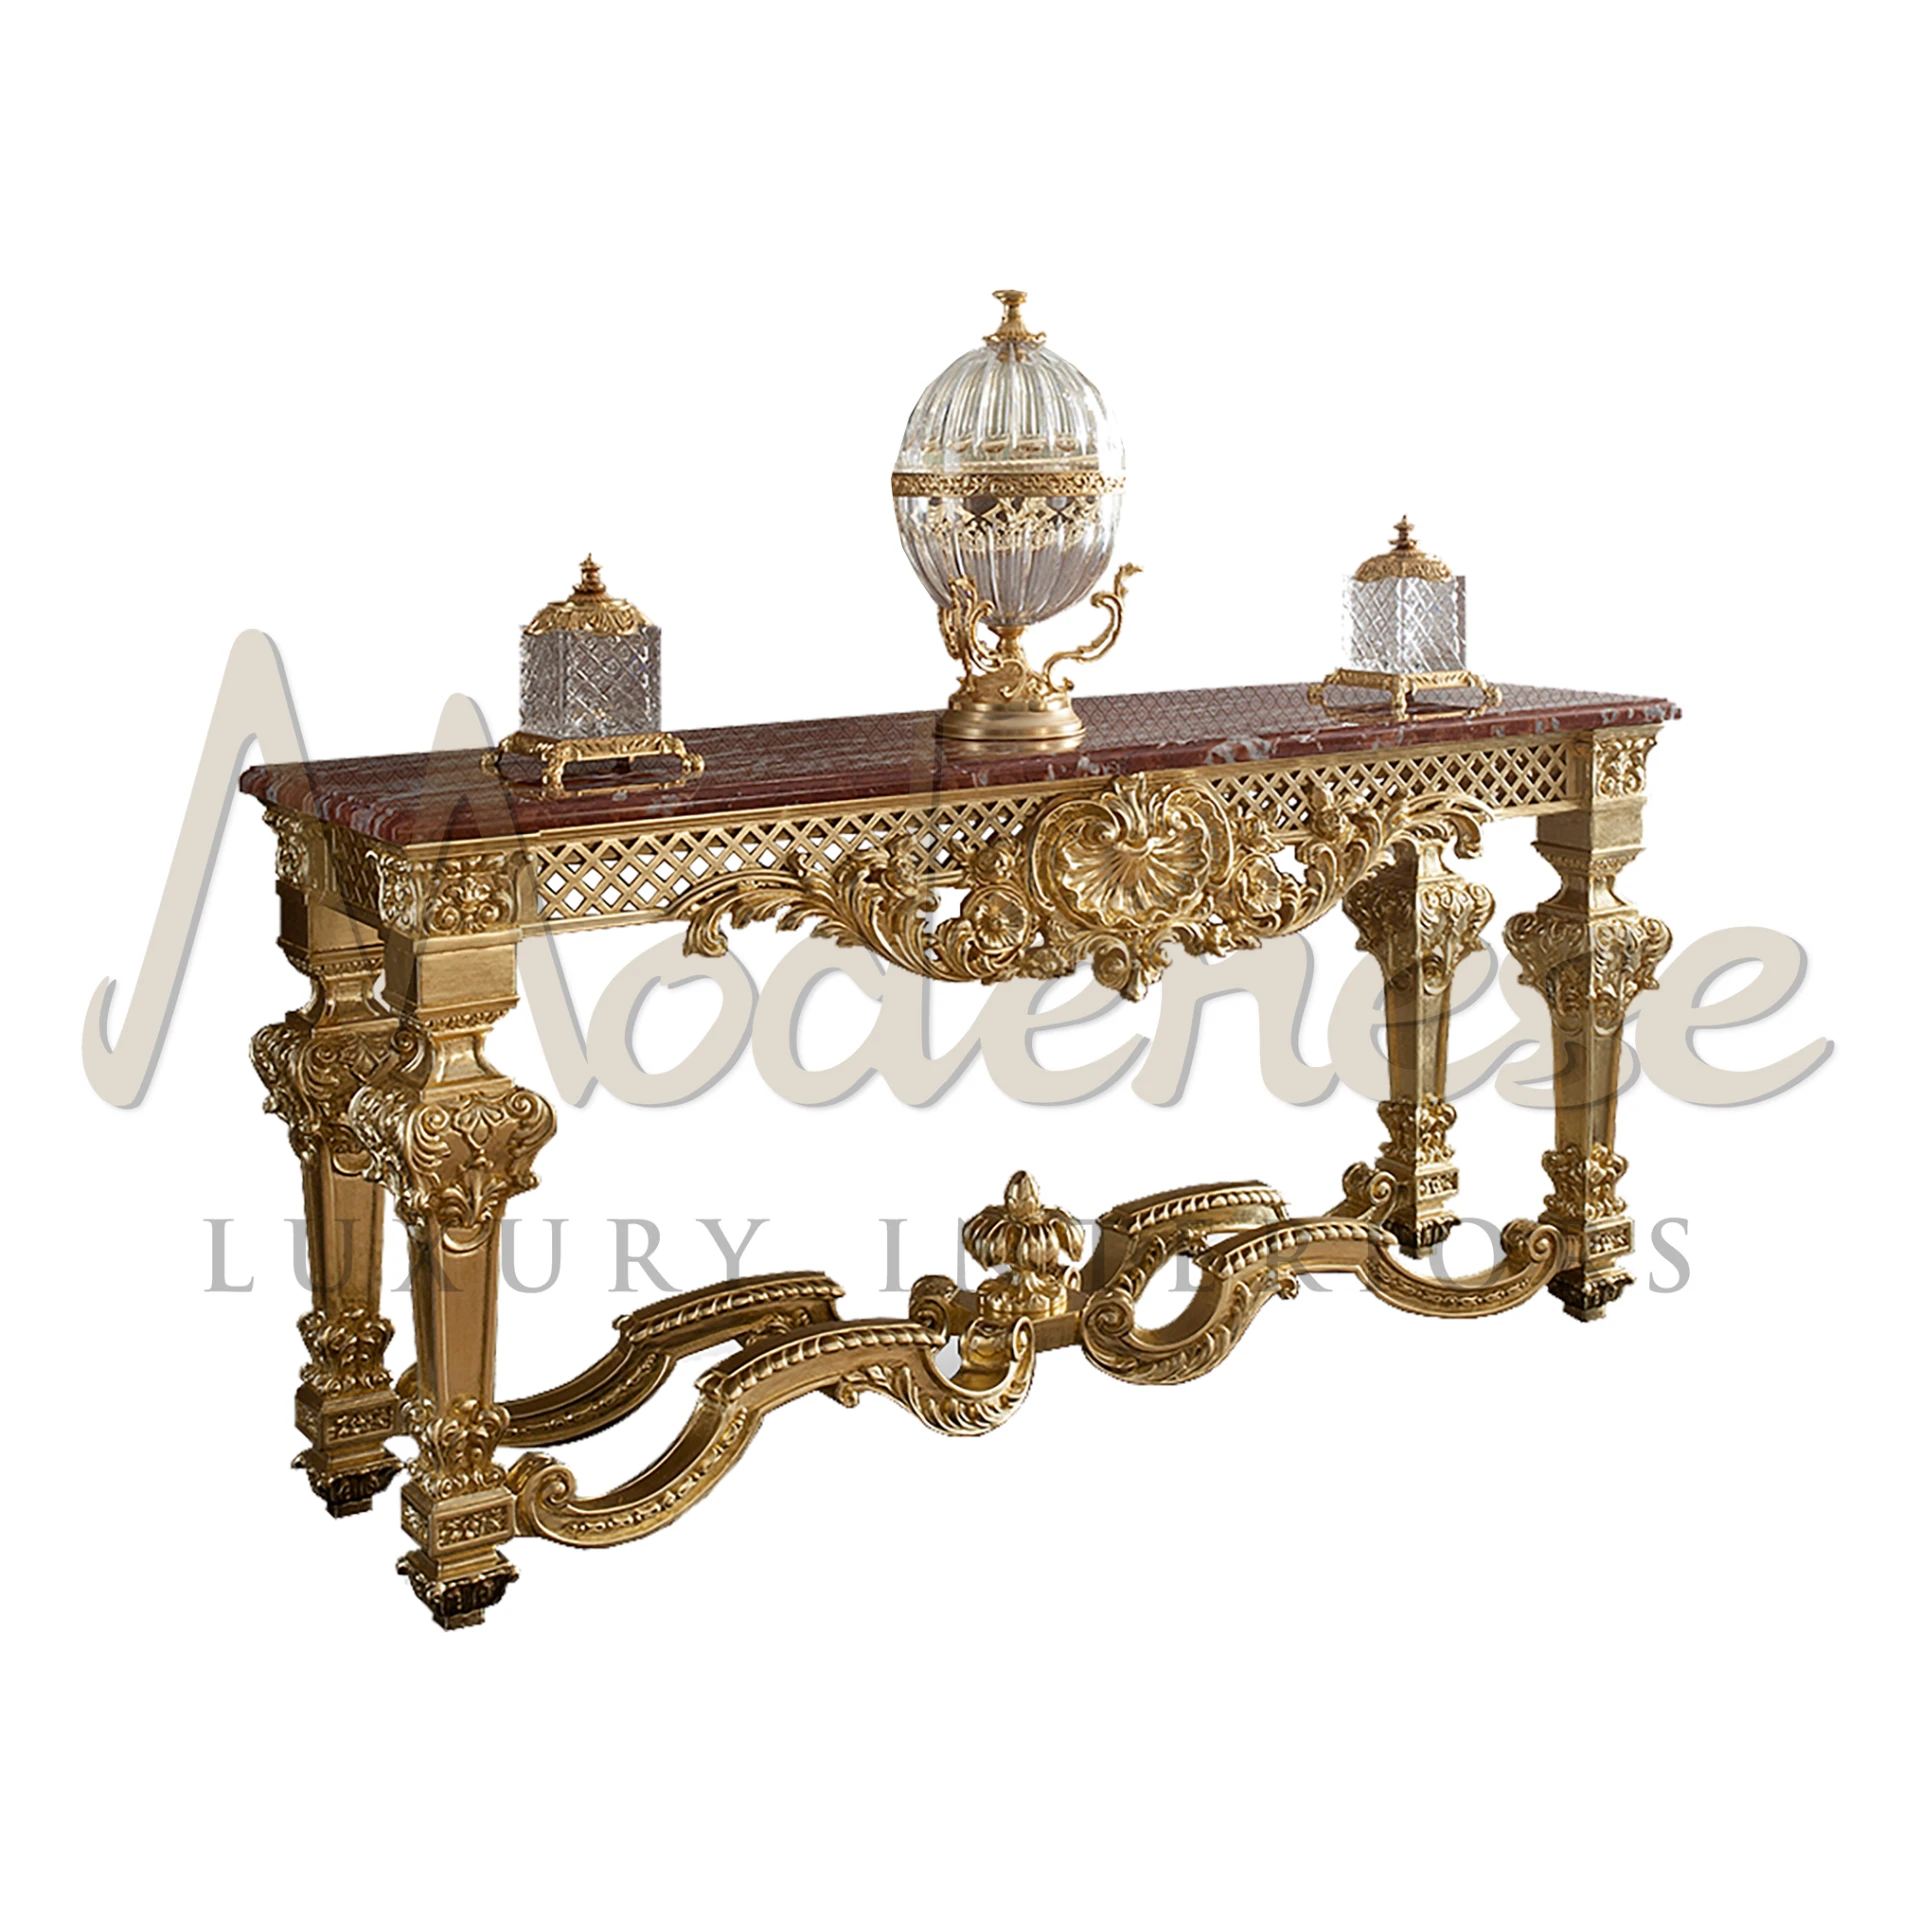 Experience Opulence: Regal Carved Console for Luxurious Living